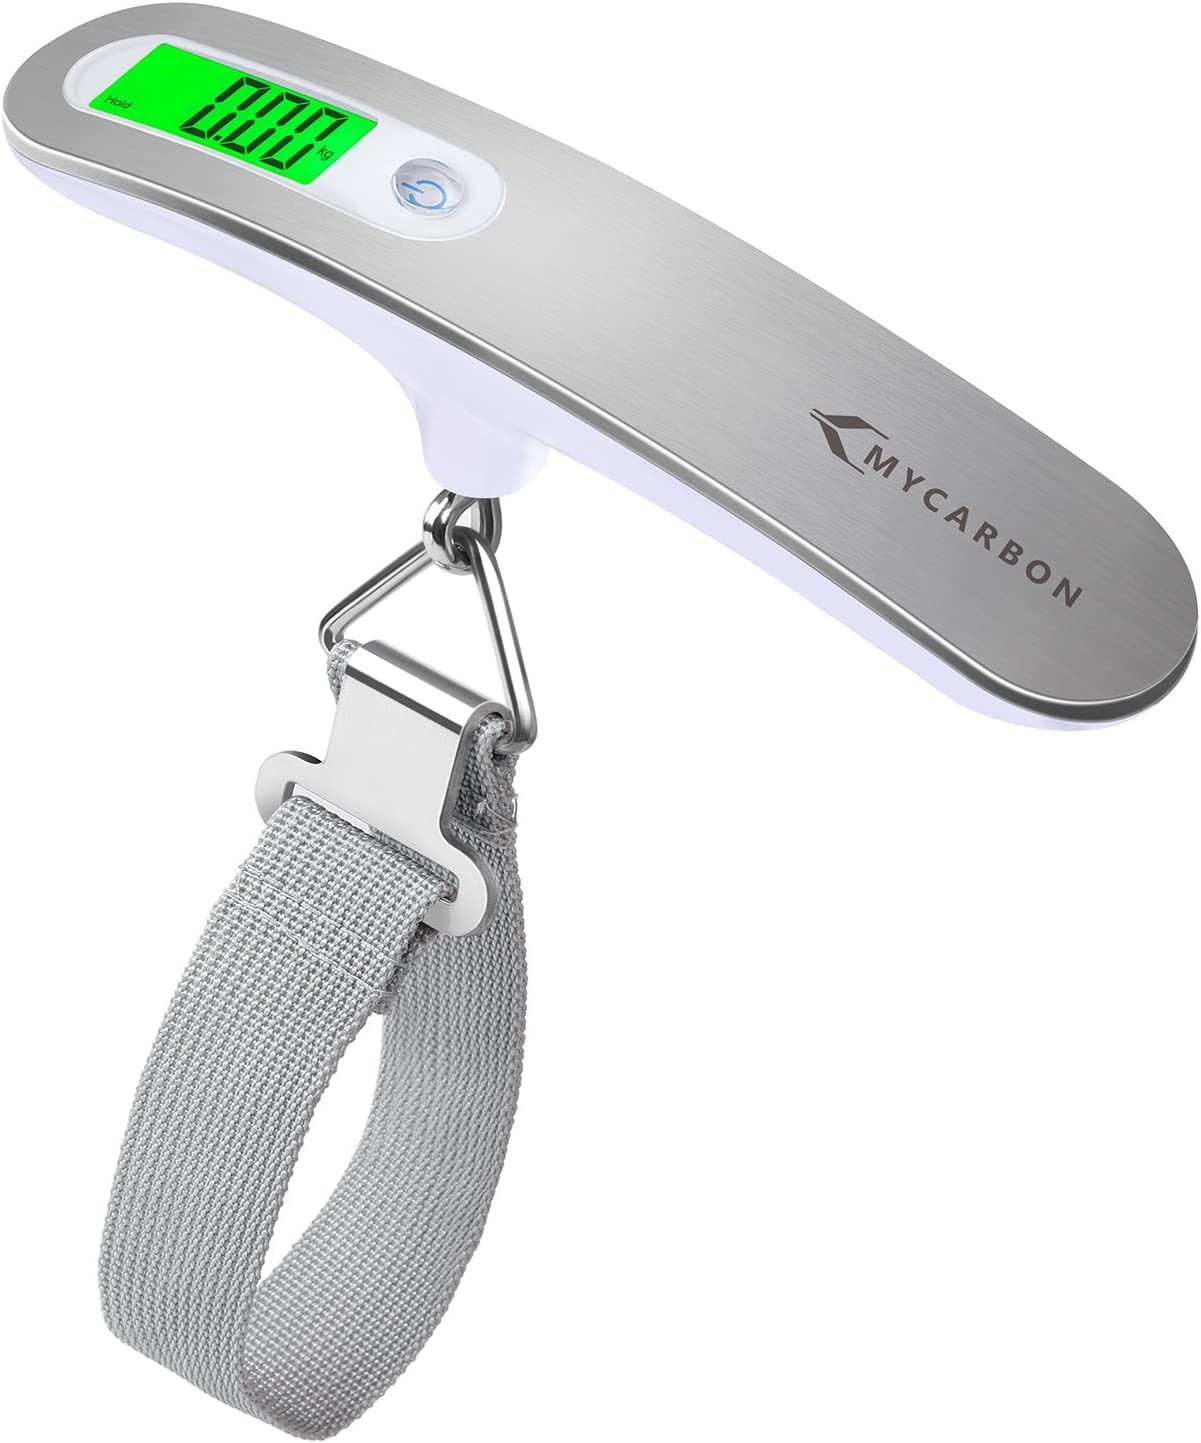 A picture of a silver, digital portable luggage scale